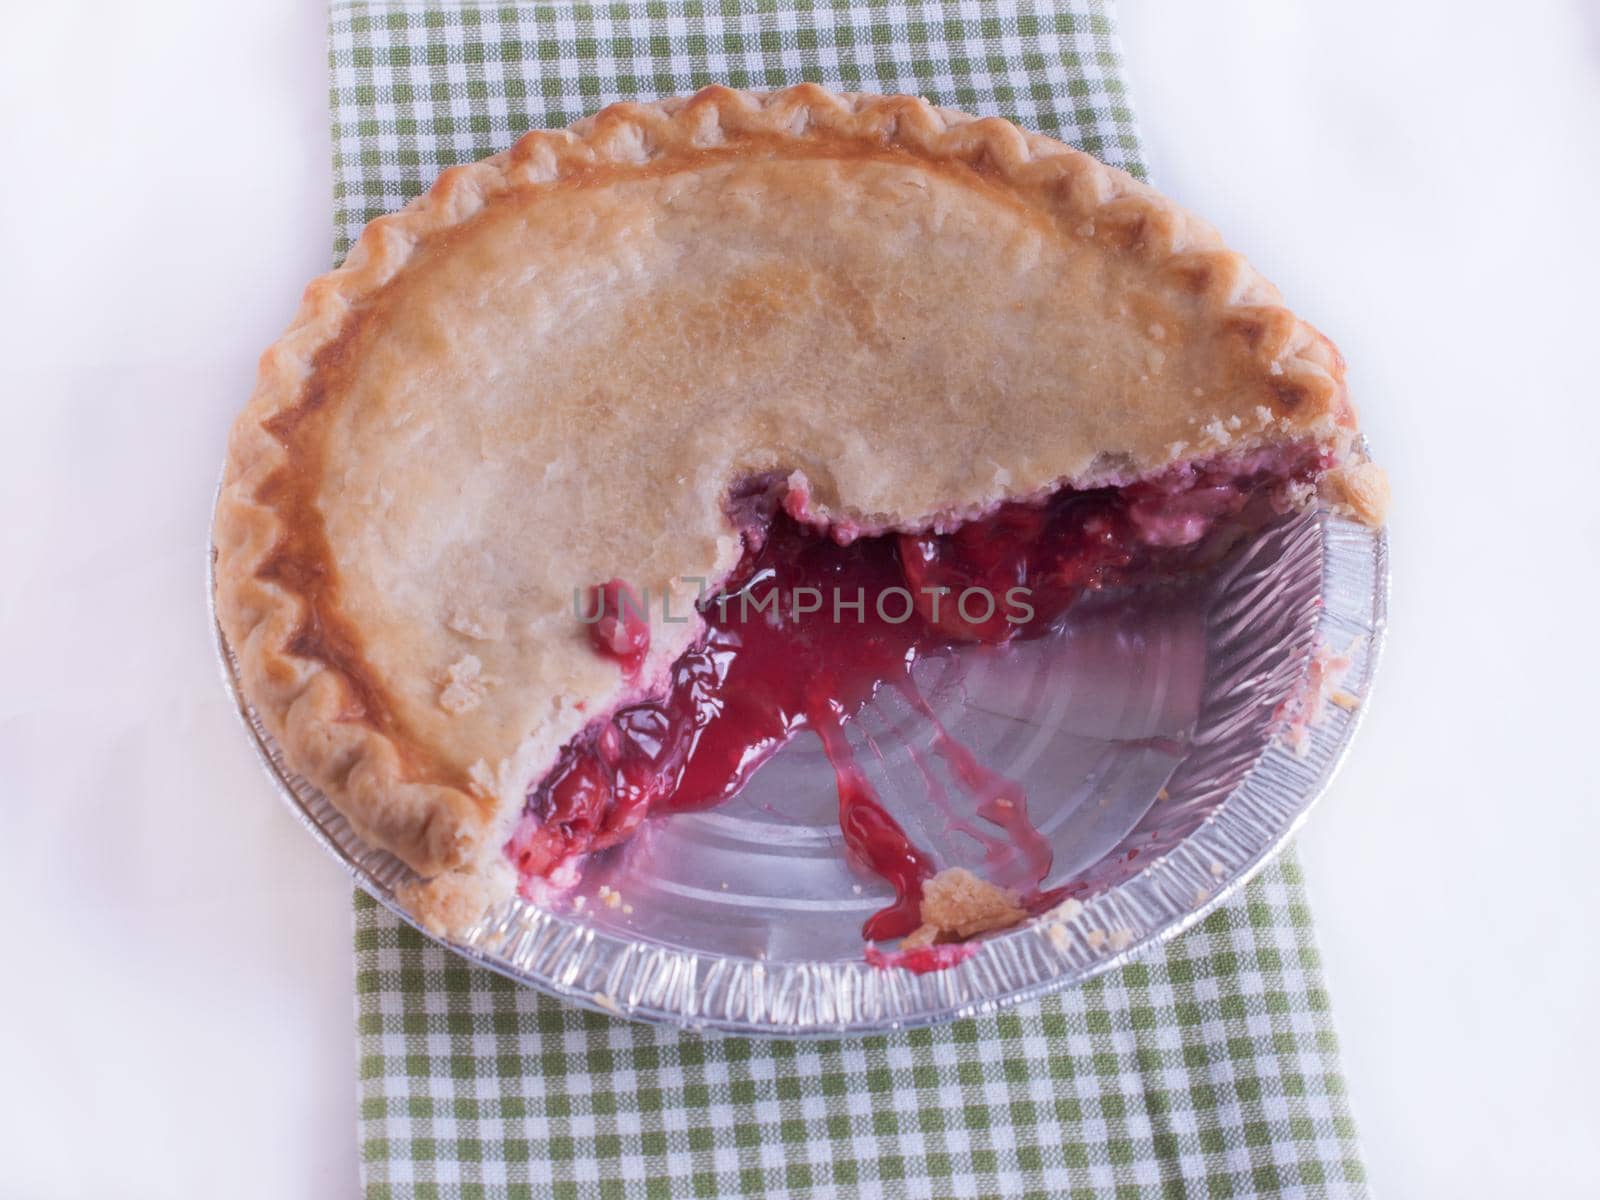 Cherry pie in baking tin with piece missing.